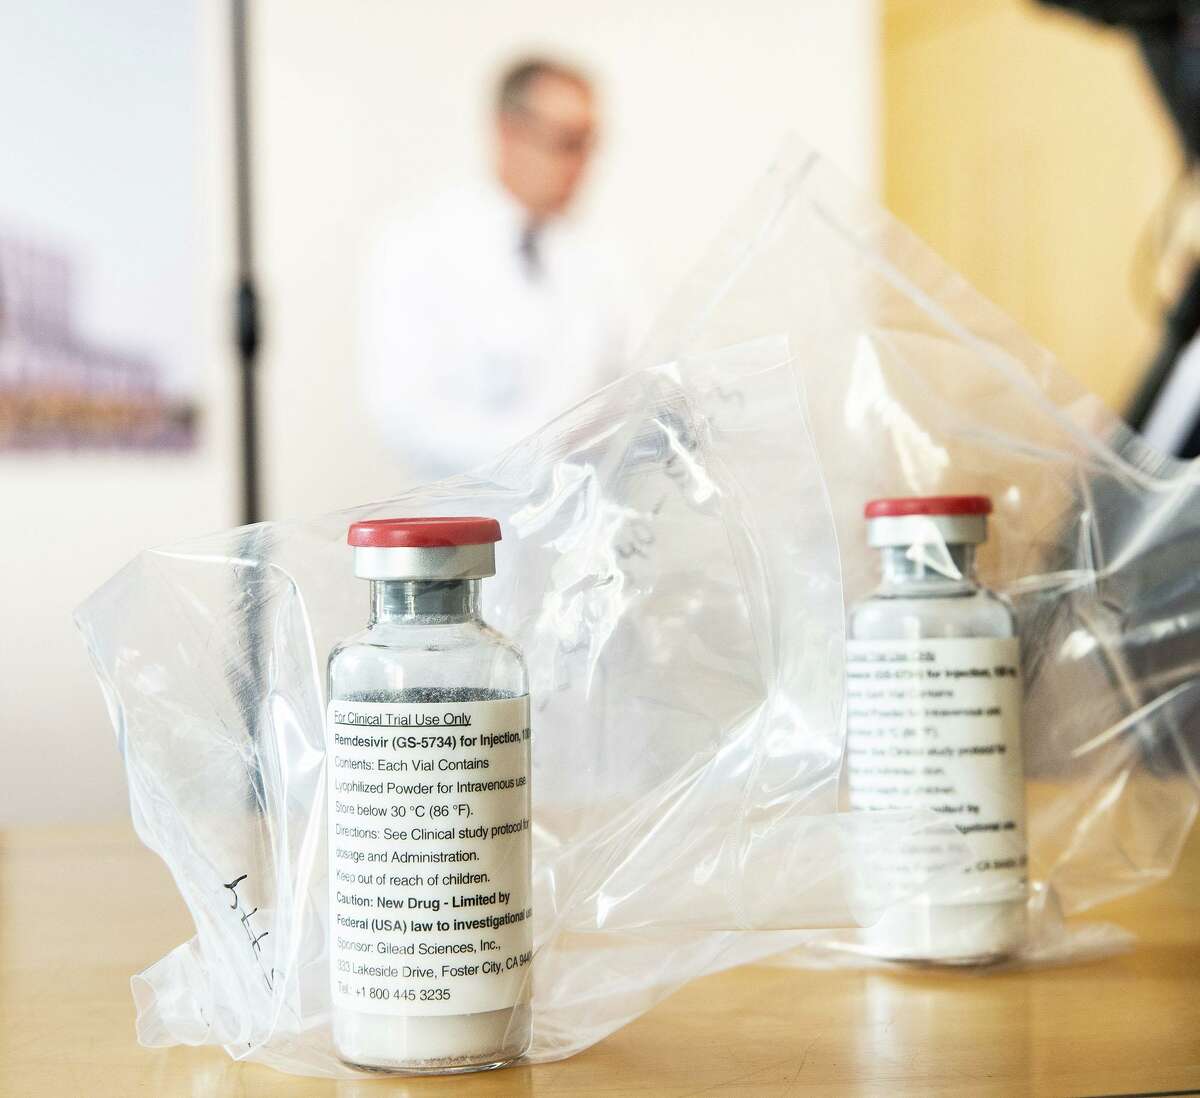 Vials of the drug Remdesivir on display during a news conference about the start of a study with use of the drug in severely ill patients at the University Hospital Eppendorf in Hamburg, Germany, on April 8, 2020, amid the coronavirus pandemic.